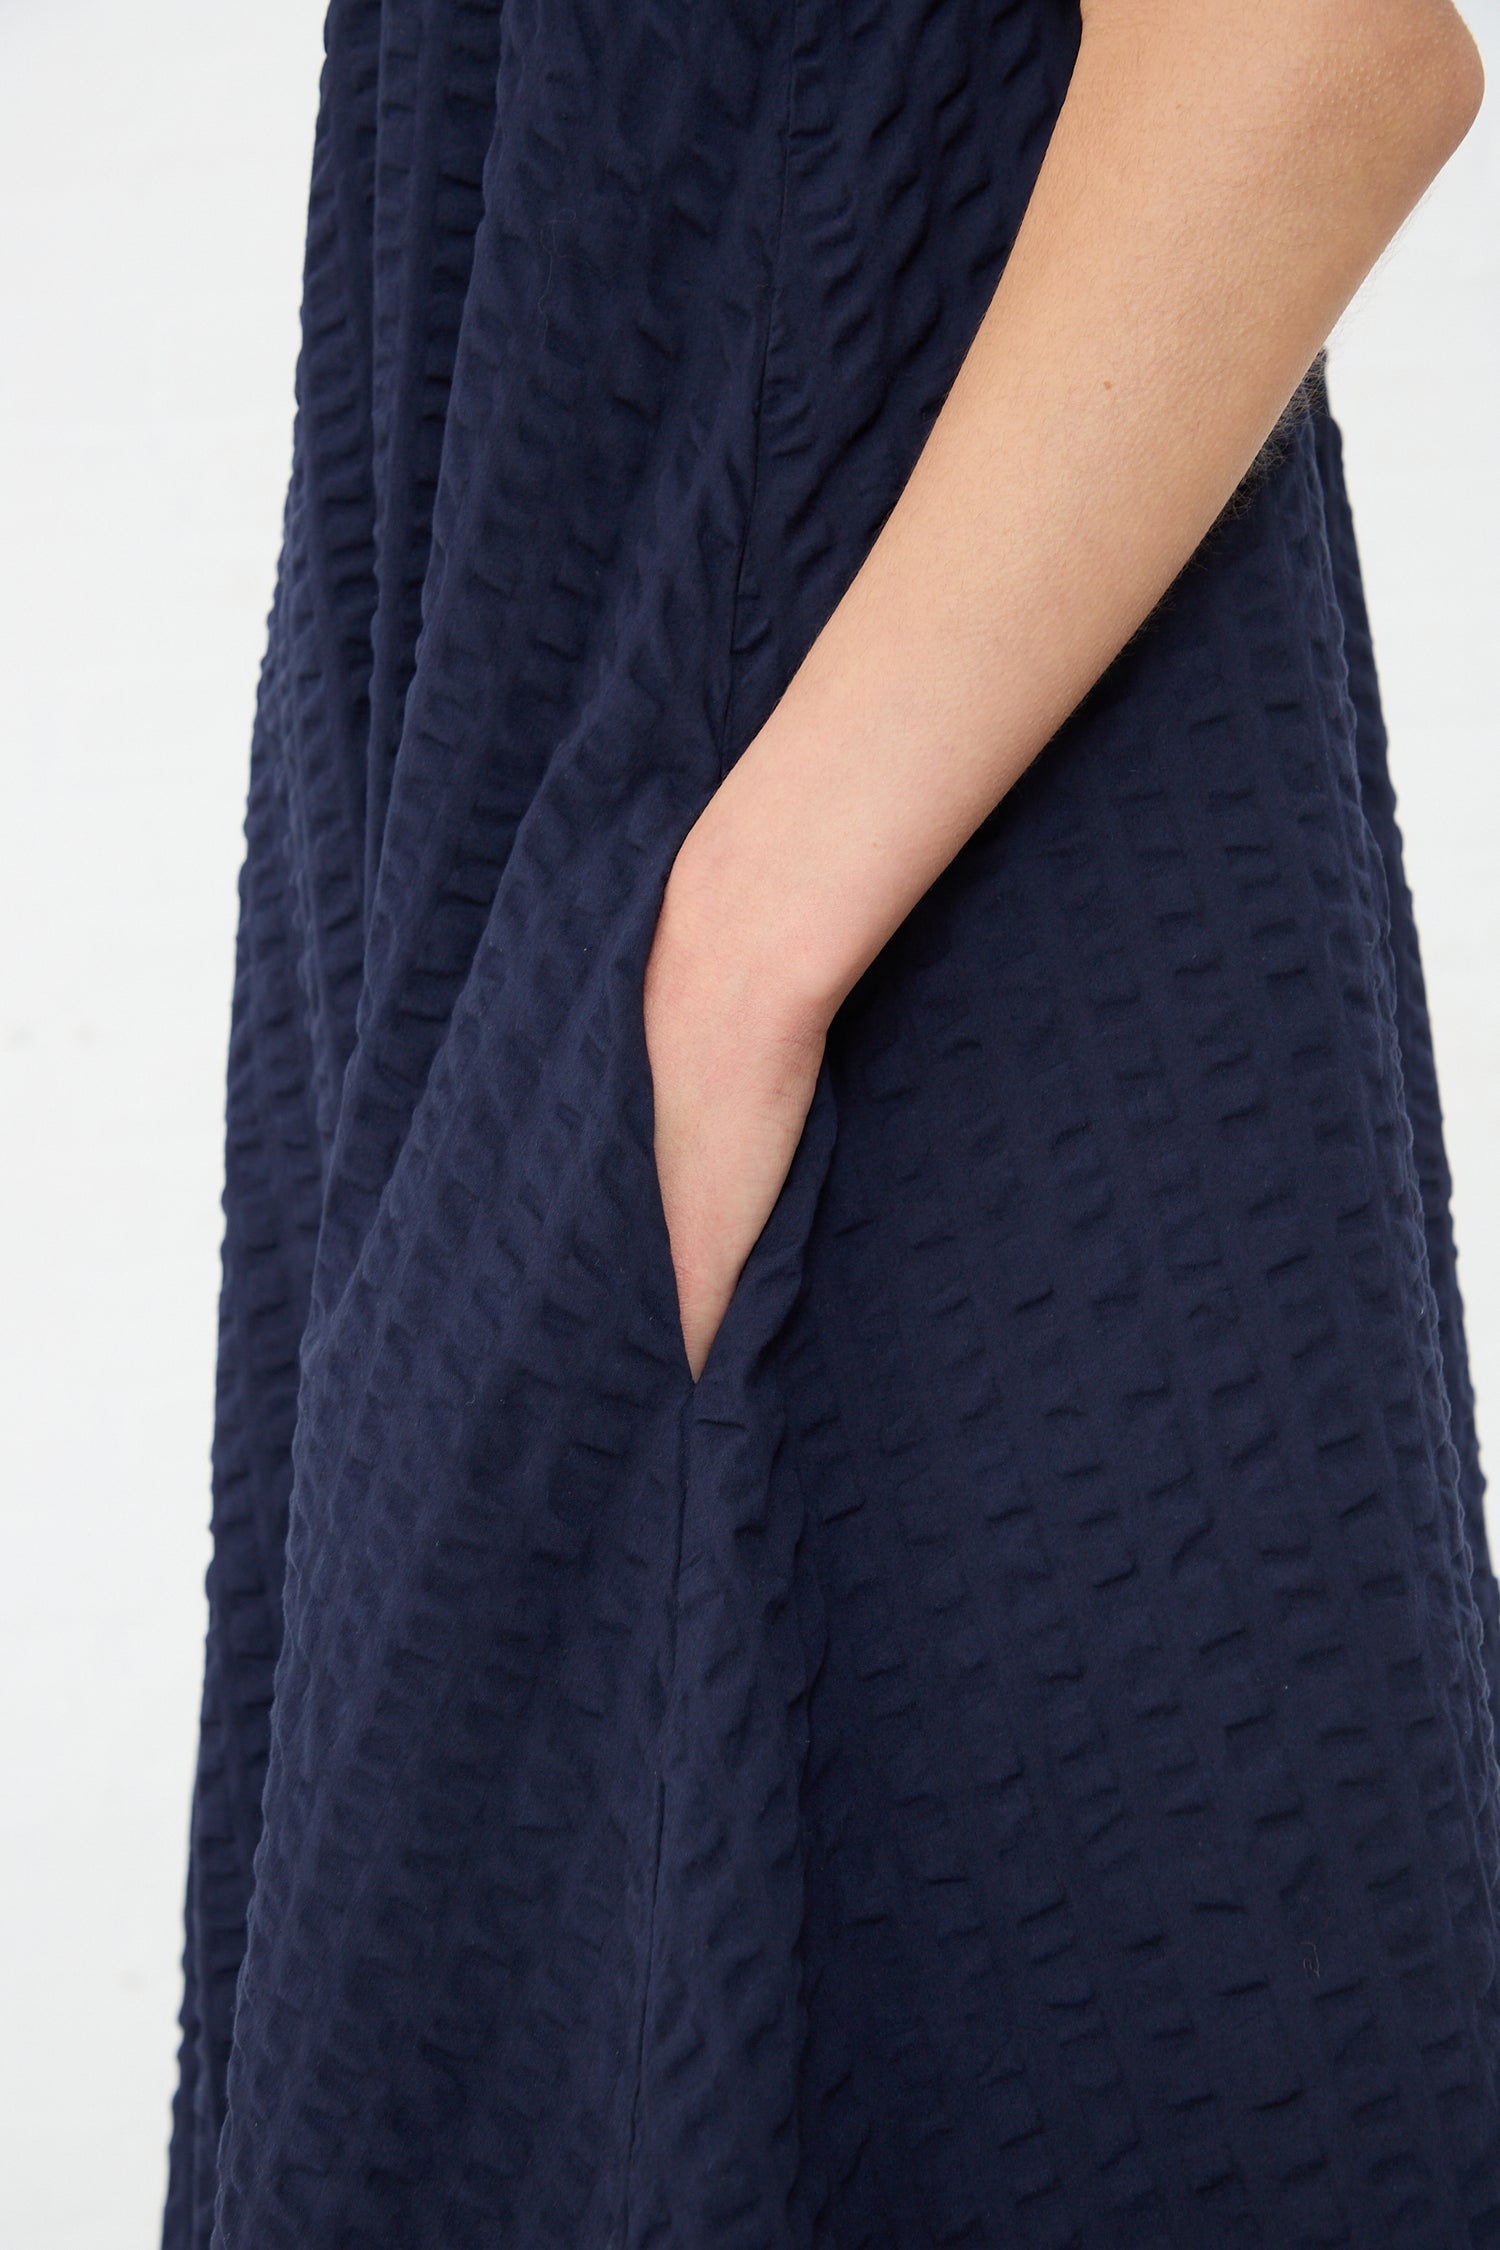 A close-up view of a person wearing a Black Crane Cotton Seersucker Parachute Dress in Navy with a visible arm seam.